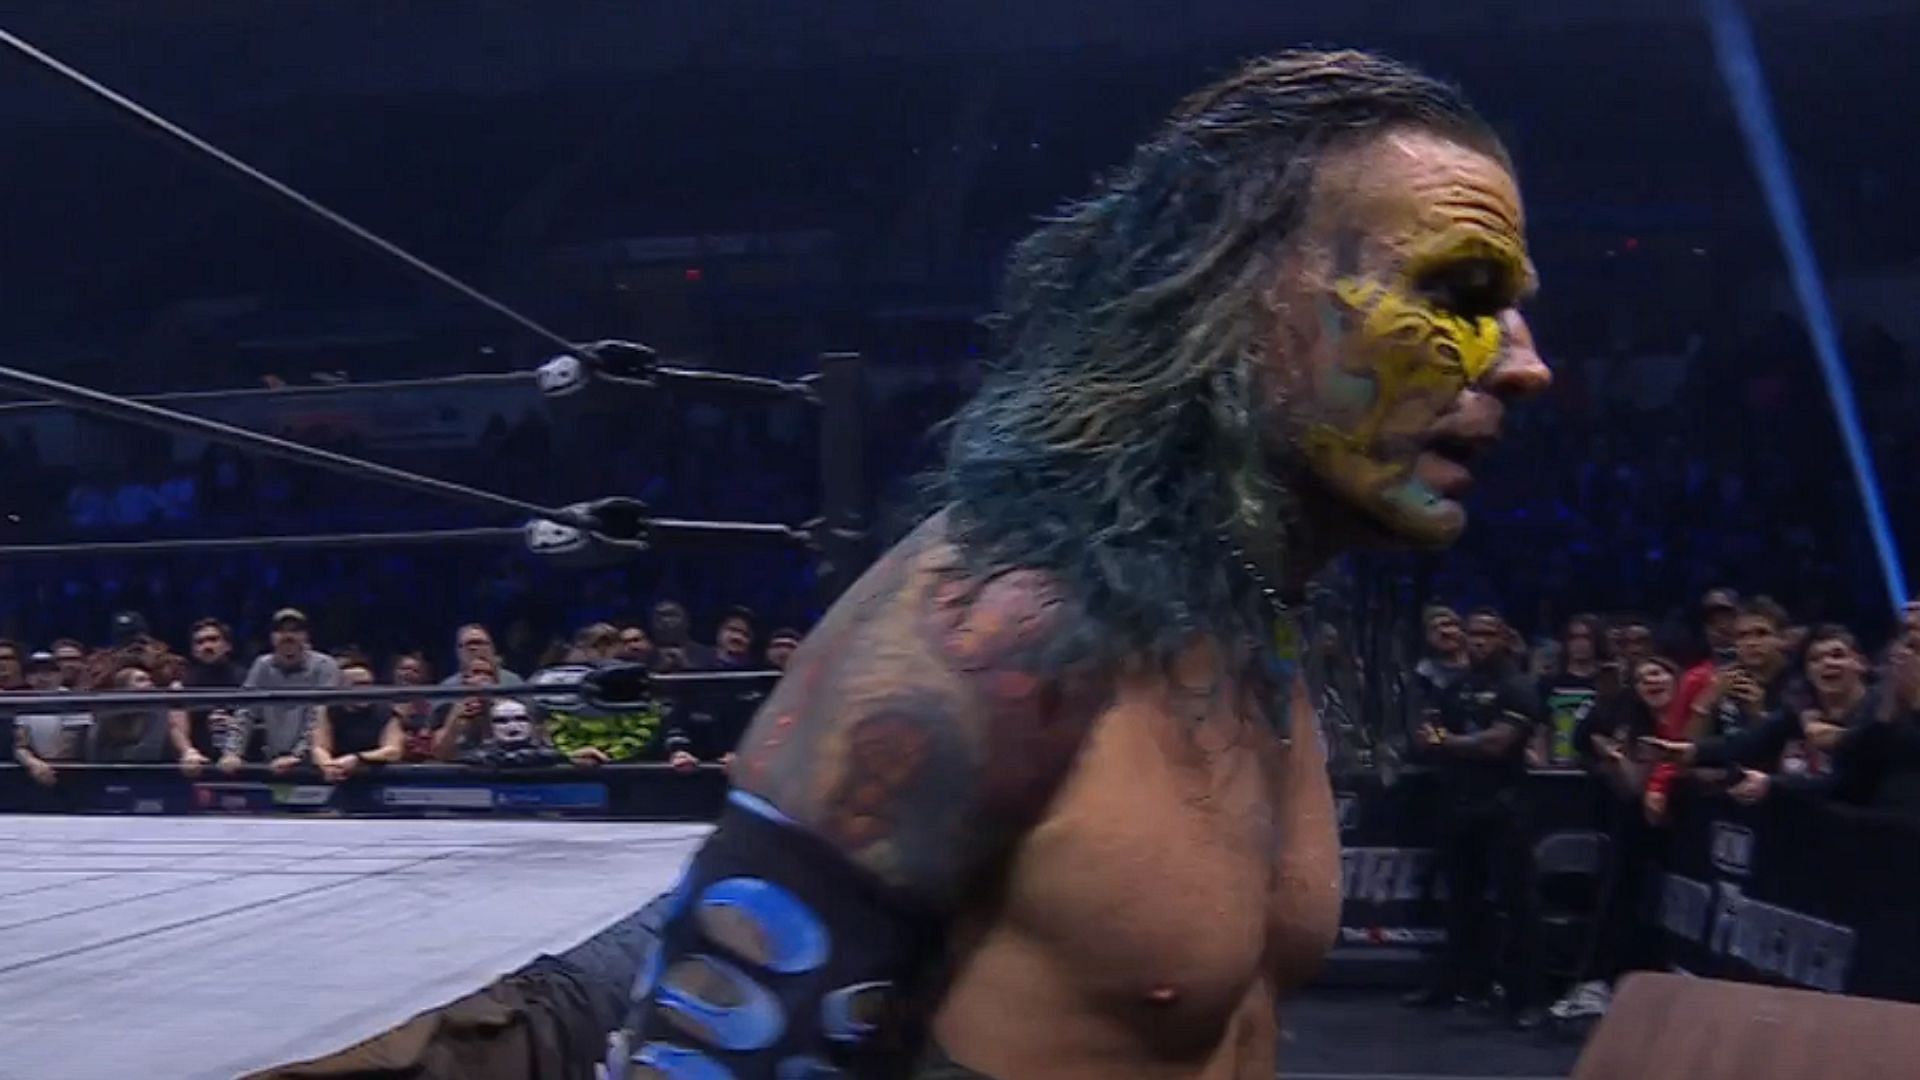 Jeff Hardy is a former World Heavyweight Champion who is now with AEW [Photo source: Screenshot of Triller TV